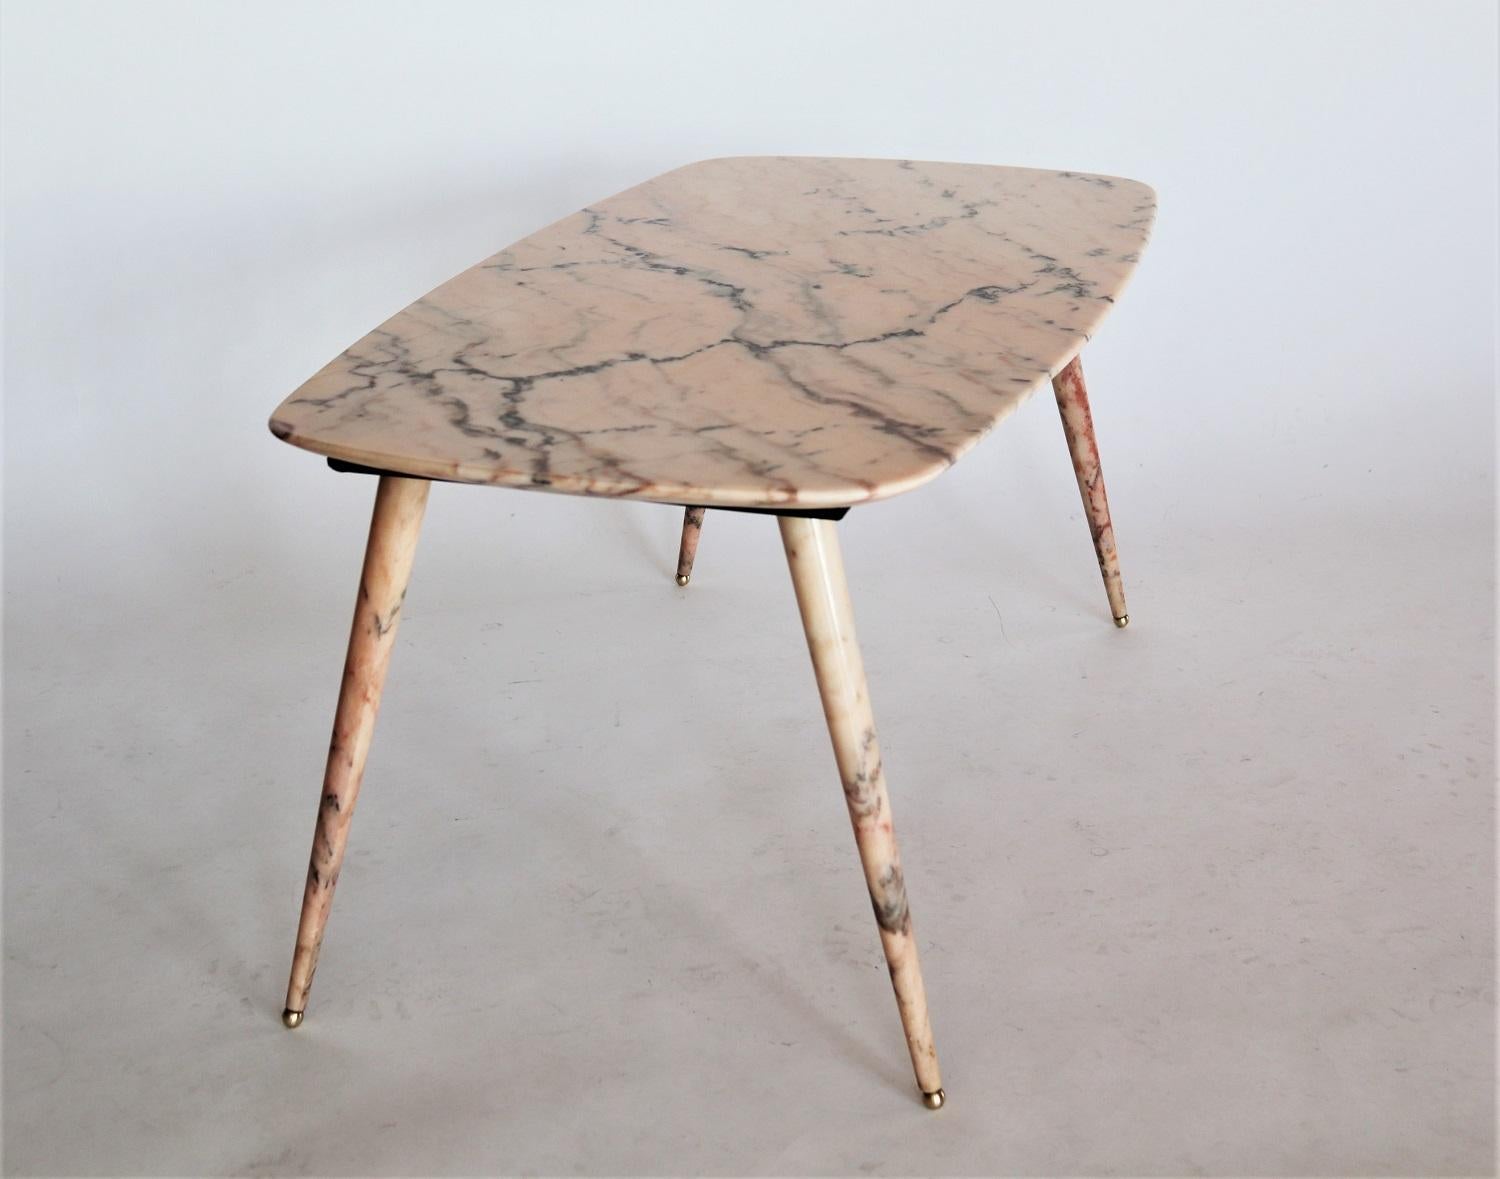 Beautiful coffee table with gorgeous pink marble top and marble legs with brass tips. Very rare to find this type of table with the marble legs.
Made in Italy during the 1950s.

The pink marble has a beautiful natural marble design with strong